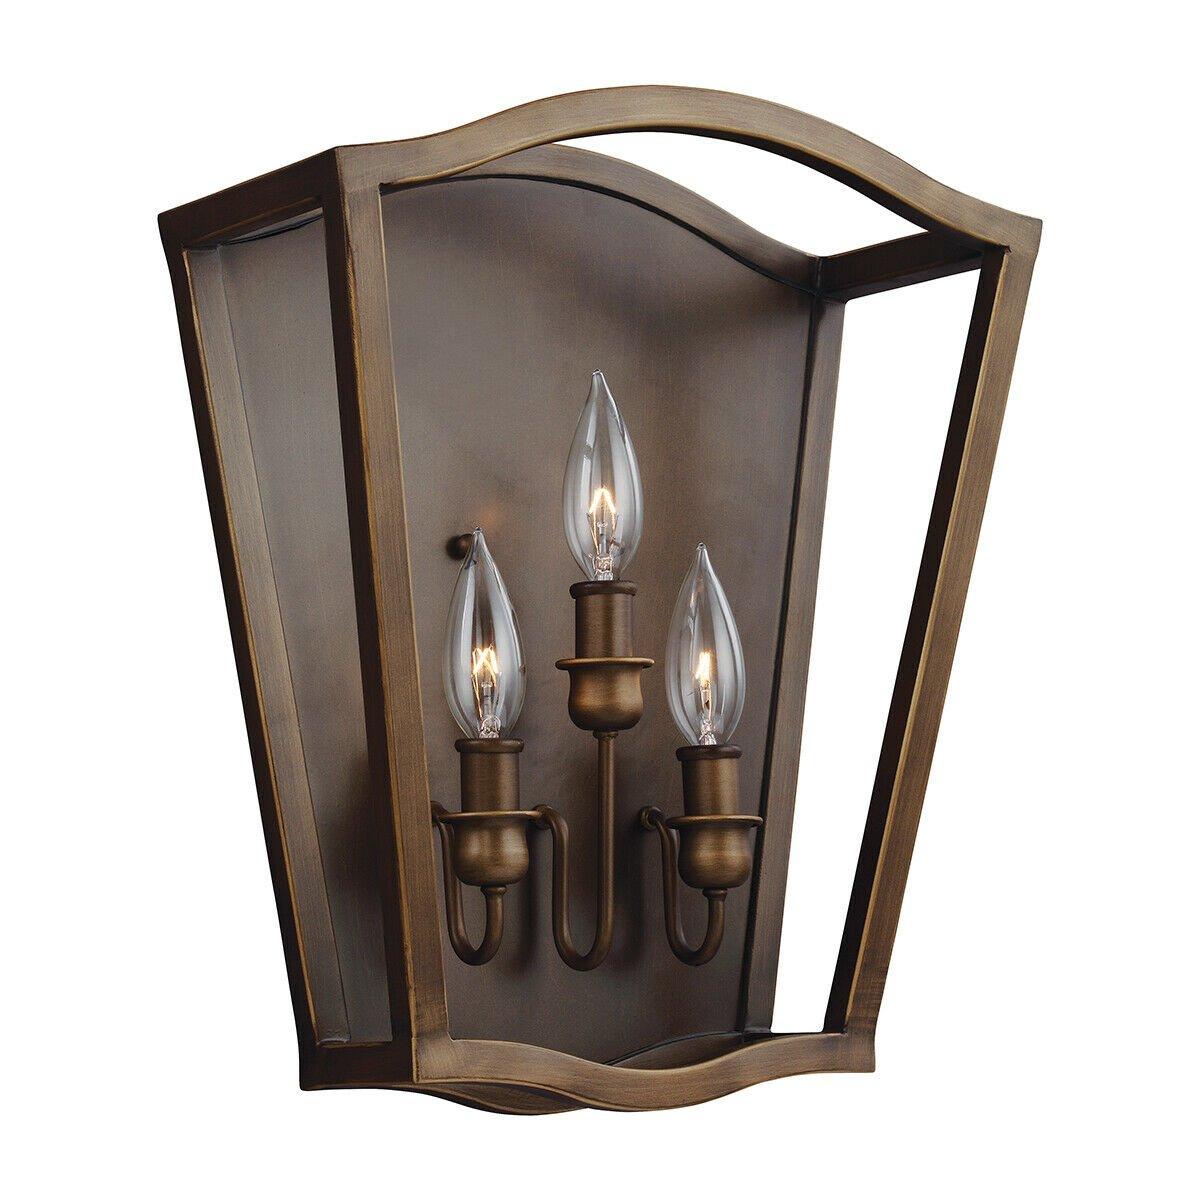 3 Bulb Wall Light Sconce Painted Aged Brass Finish LED E14 60W Bulb